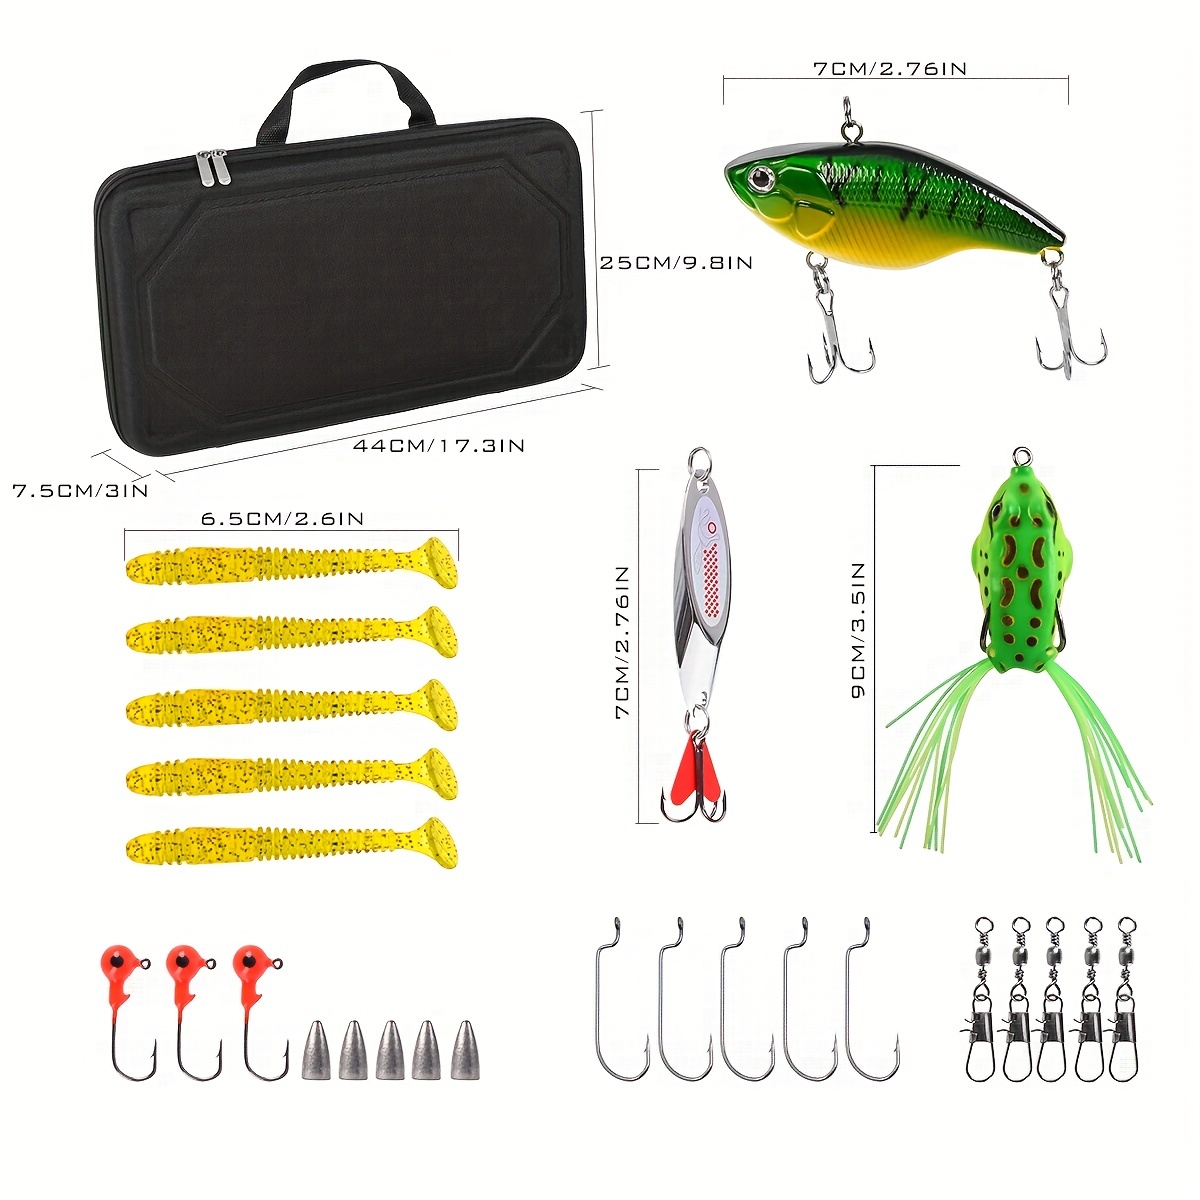 Rod and reel for saltwater lure